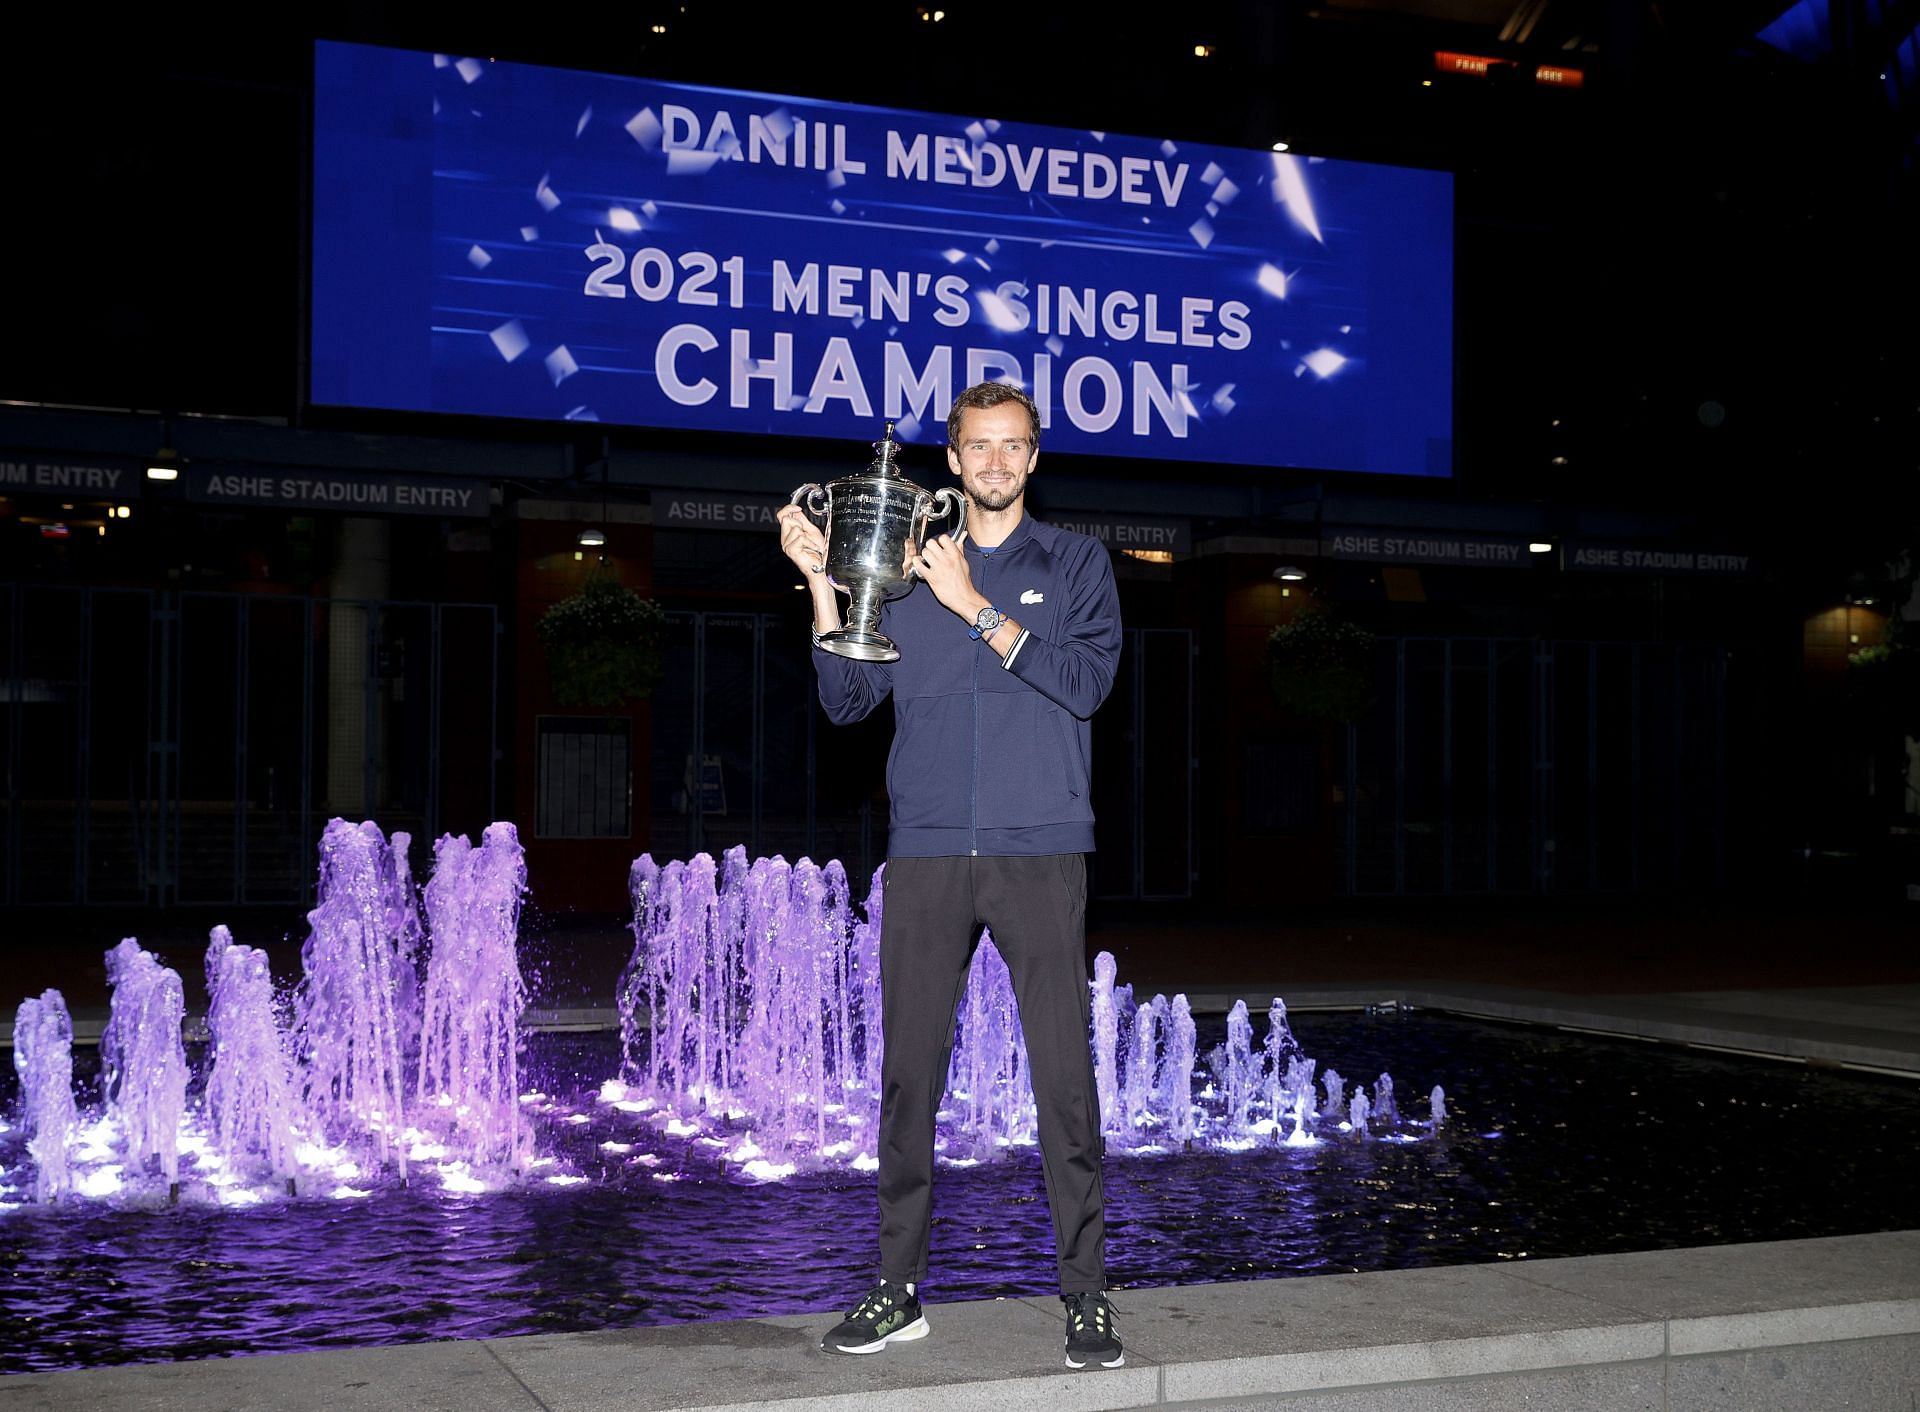 Daniil Medvedev with his 2021 US Open title